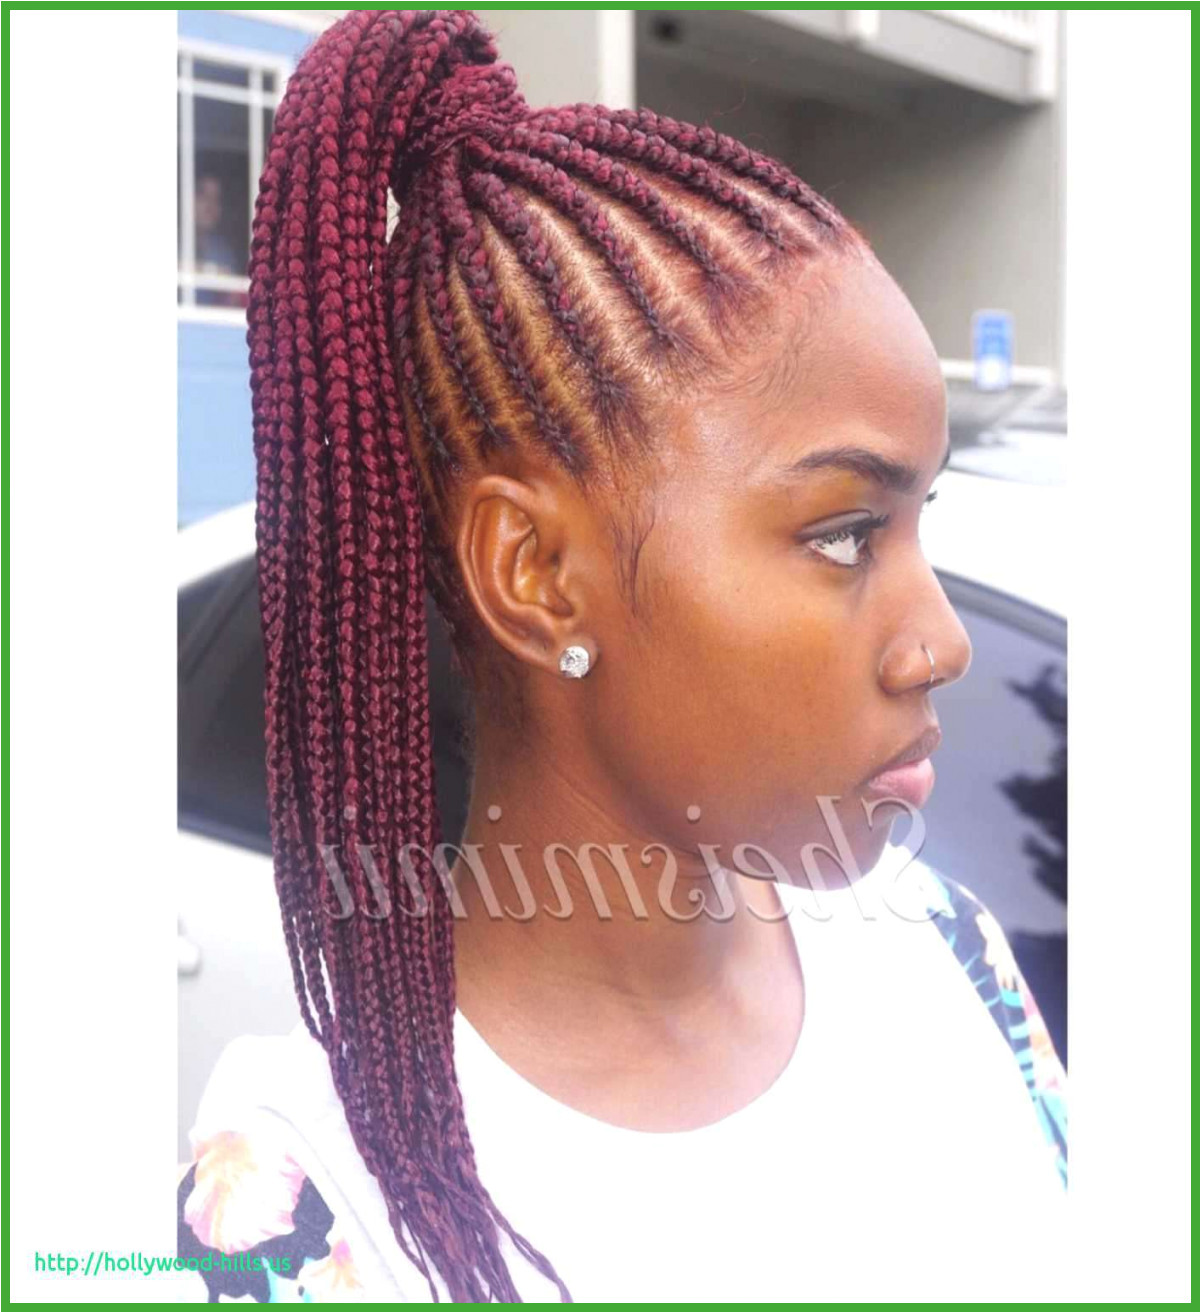 New Dreadlocks Hairstyles Hairstyles for Locs Hairstyles with Dreadlocks New Dread Frisuren 0d